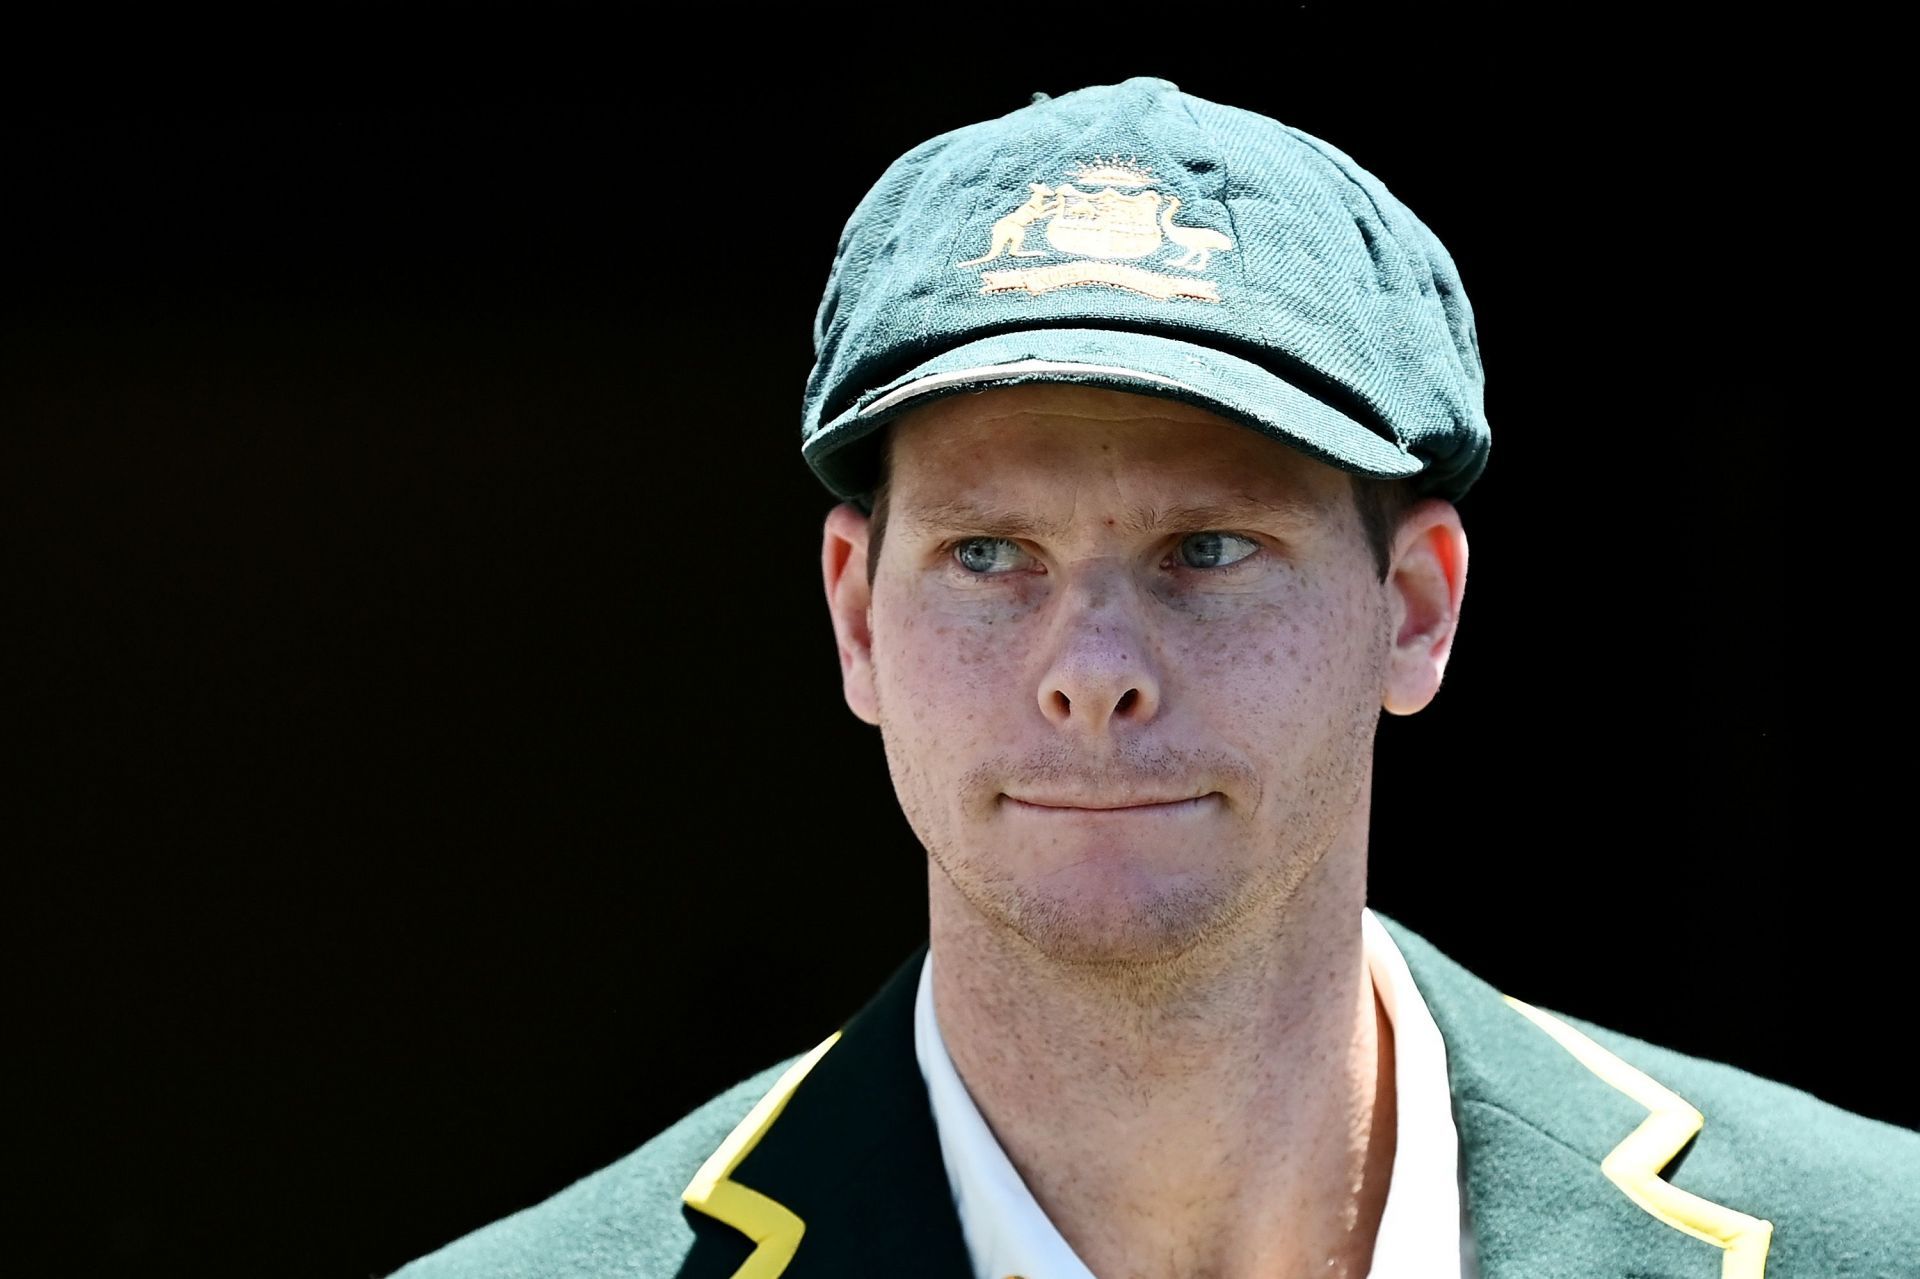 Steve Smith lost this Test leadership after Sandpapergate. Pic: Getty Images